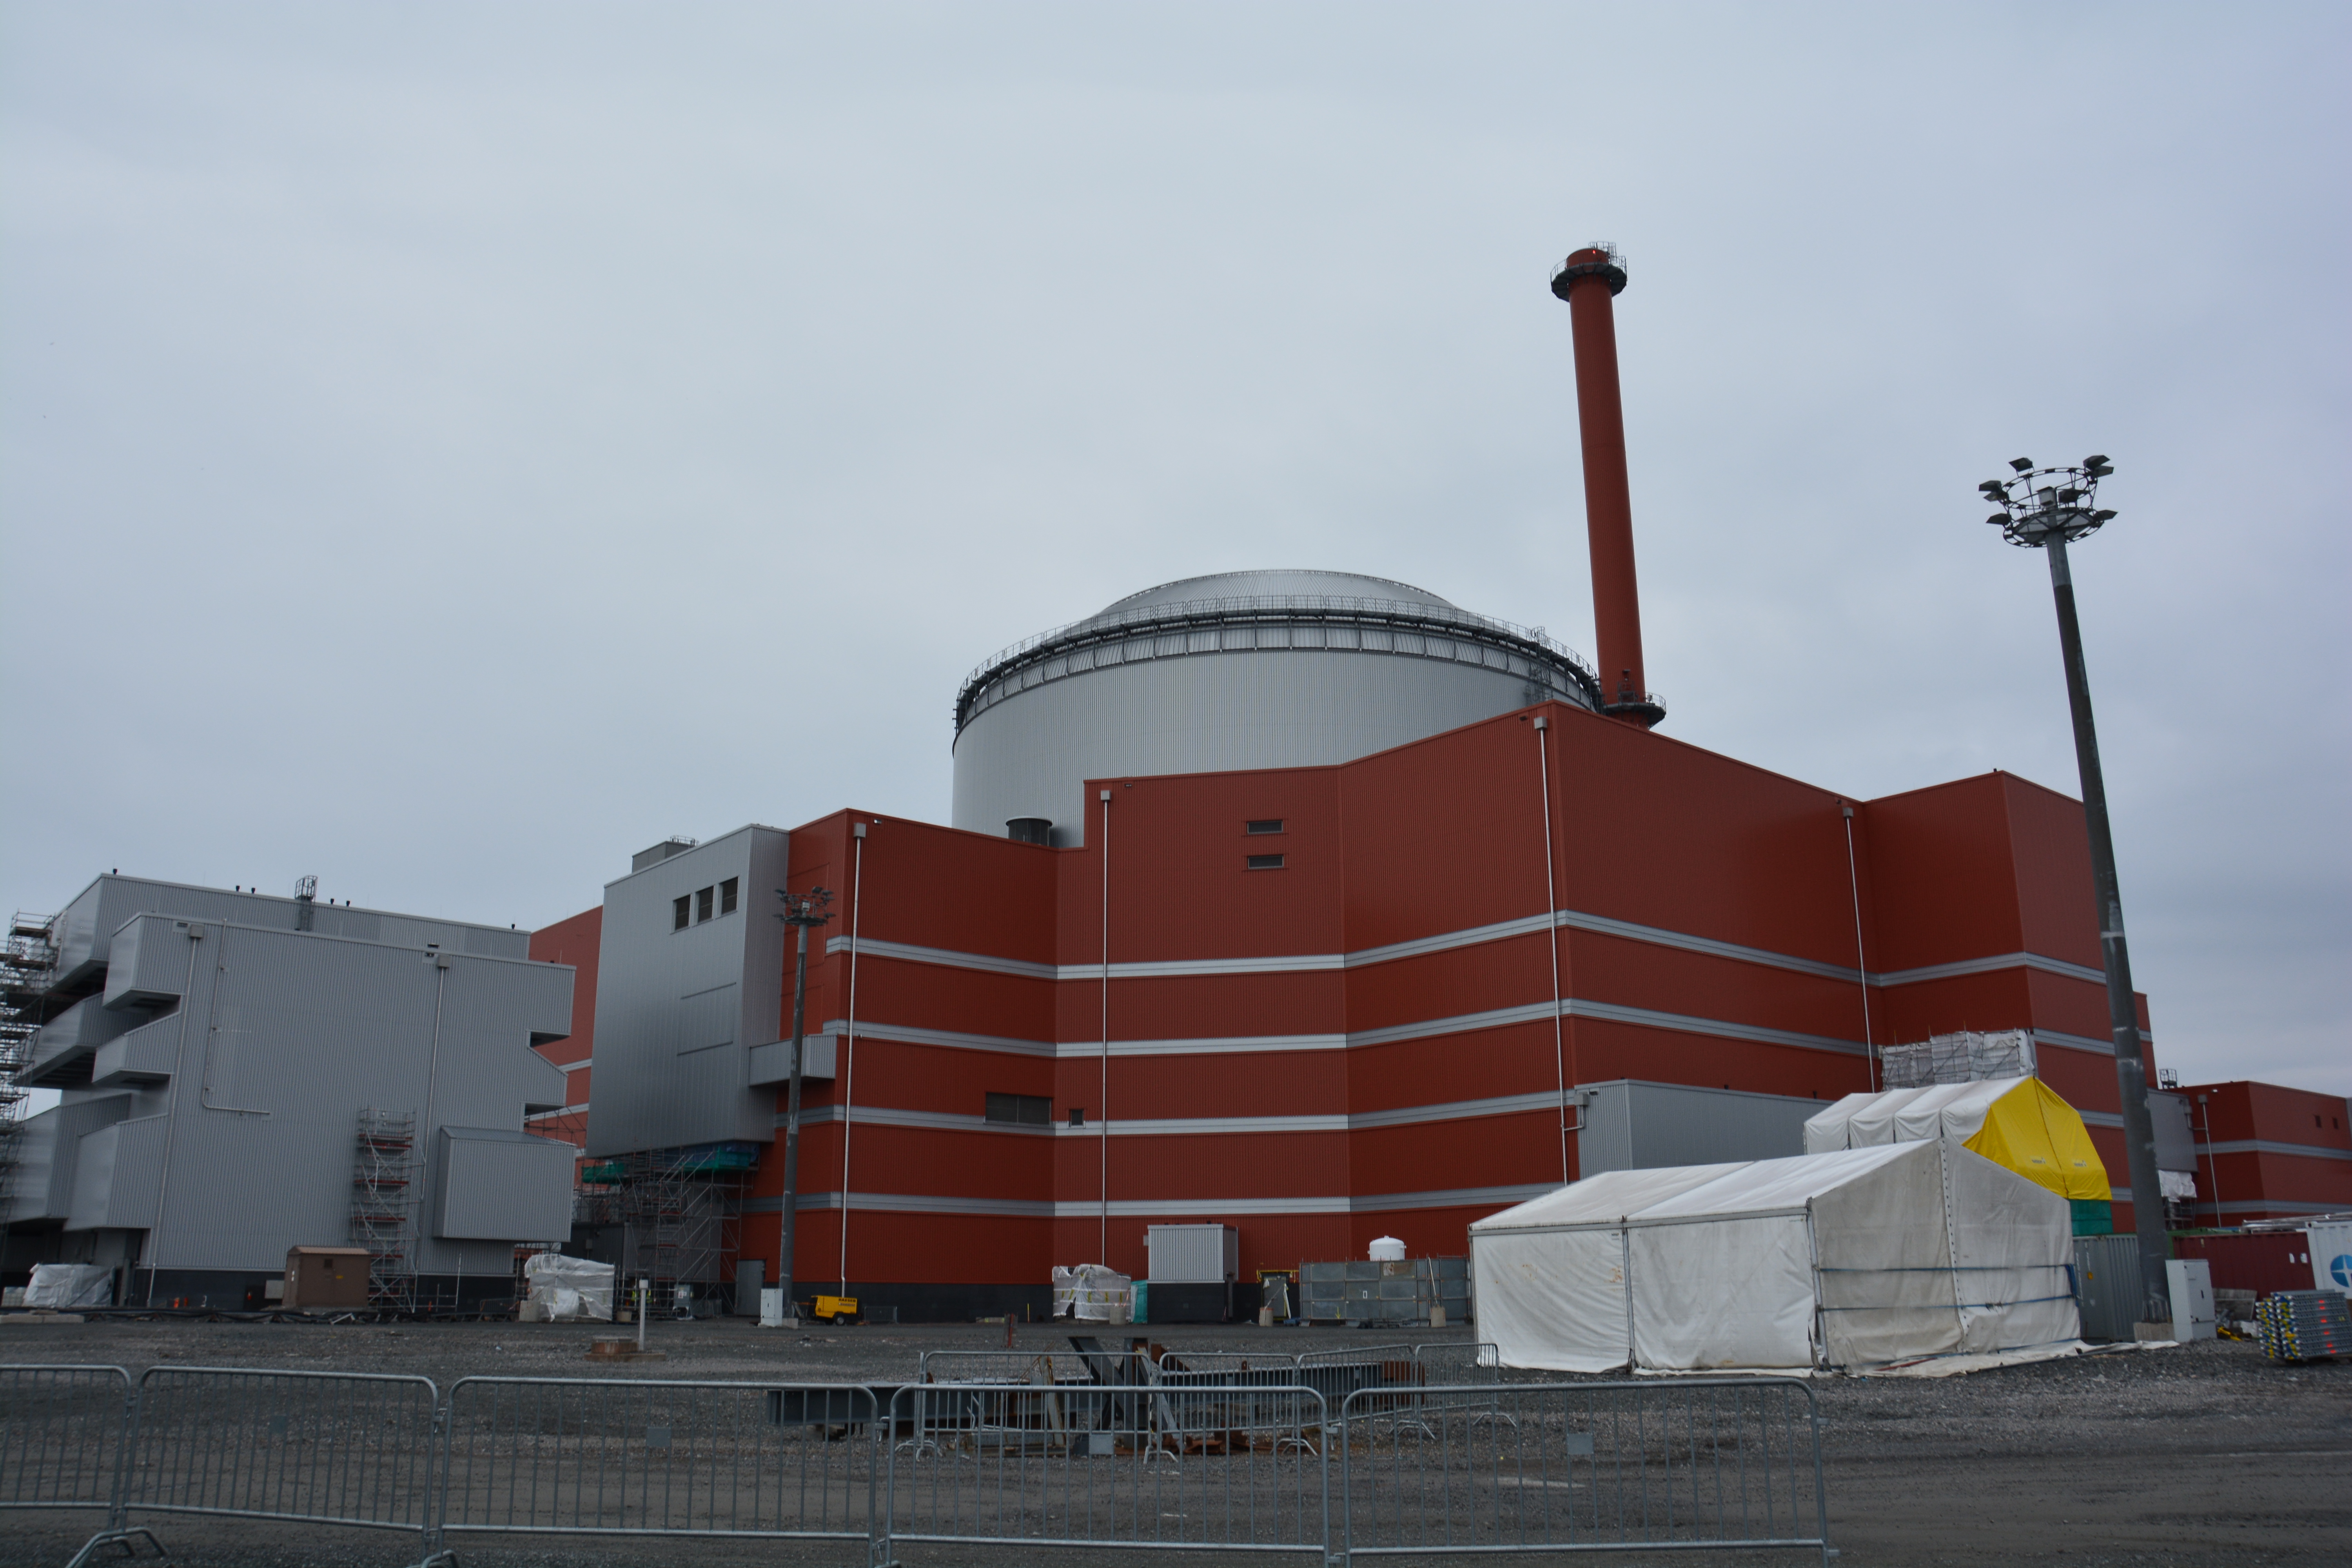 TVO, the consortium, agreed on the completion of the long-delayed Olkiluoto 3 reactor